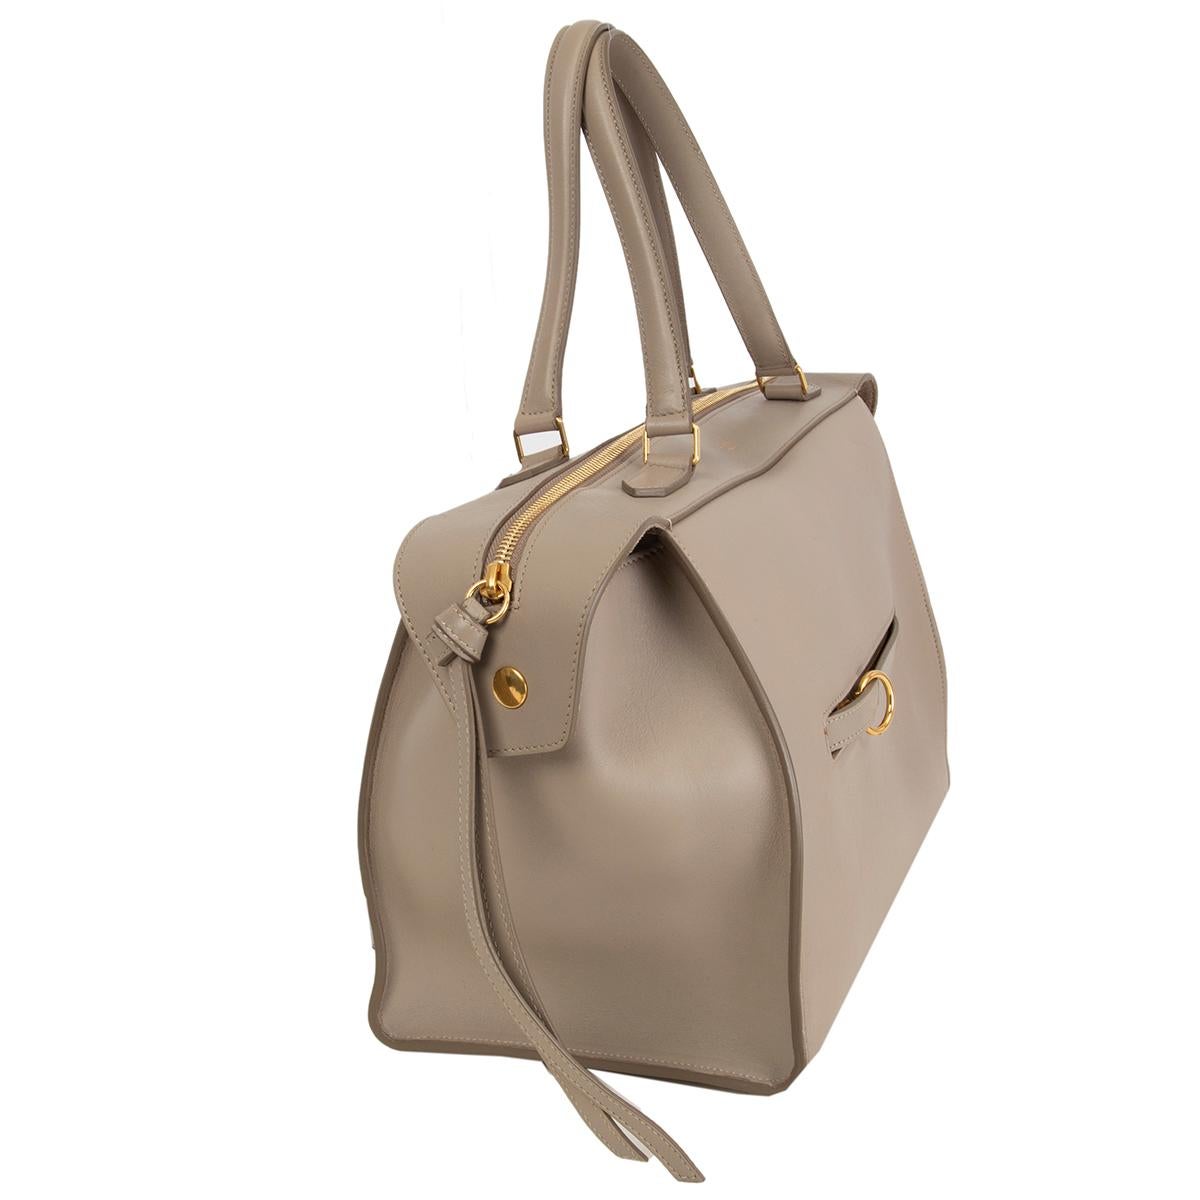 Céline 'Ring' handbag in taupe calfskin with a ring zip pocket at front featuring gold-tone hardware. Opens with a zipper on top and is lined in taupe suede with one zip pocket against the back and two slit pockets attached. Has been carried and is